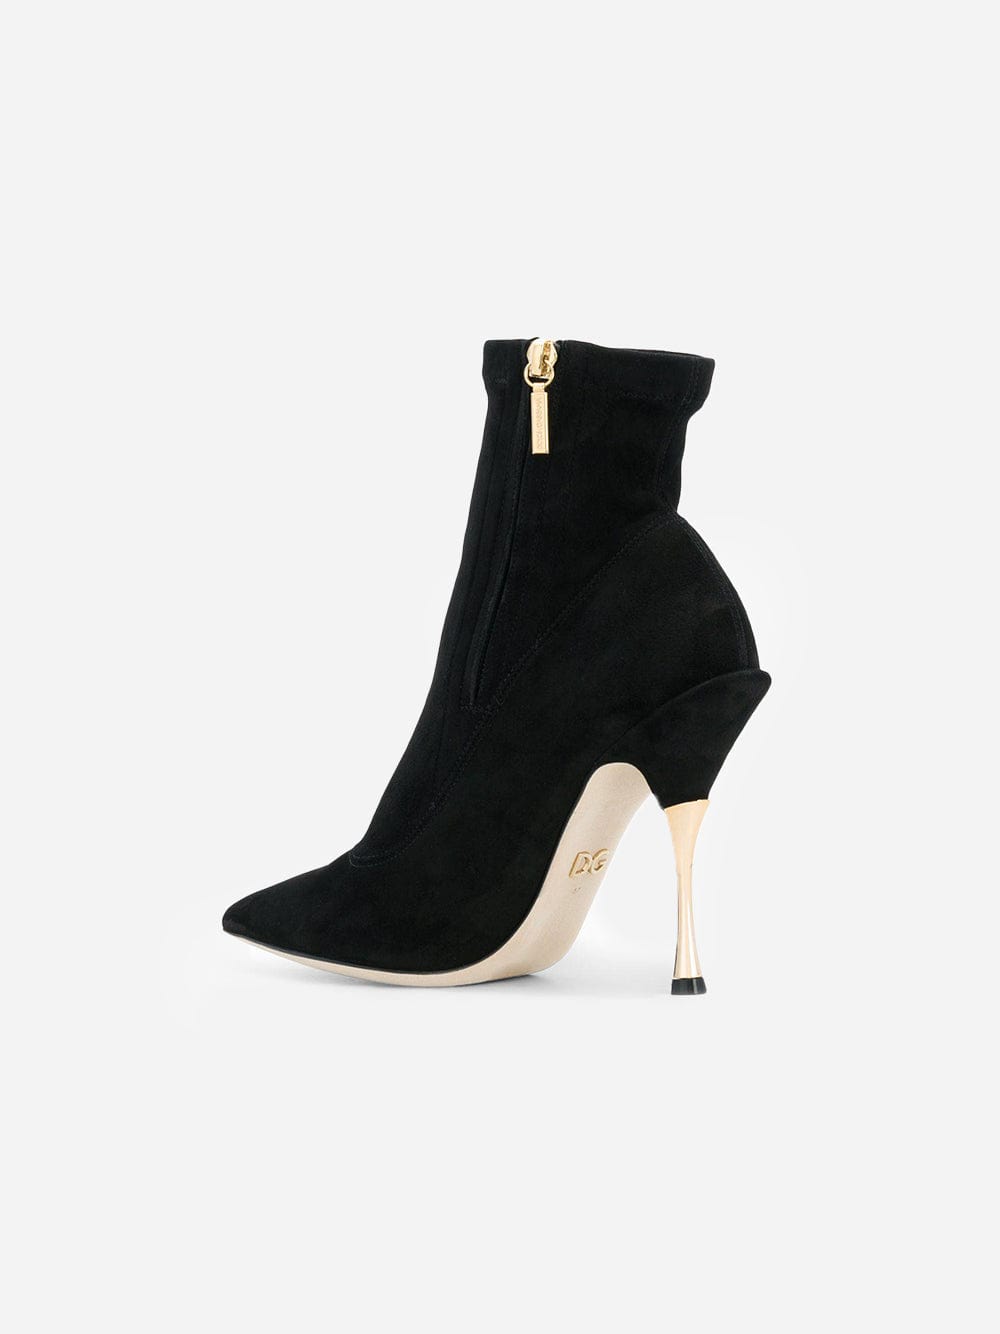 Dolce & Gabbana Pointed Suede Ankle Boots